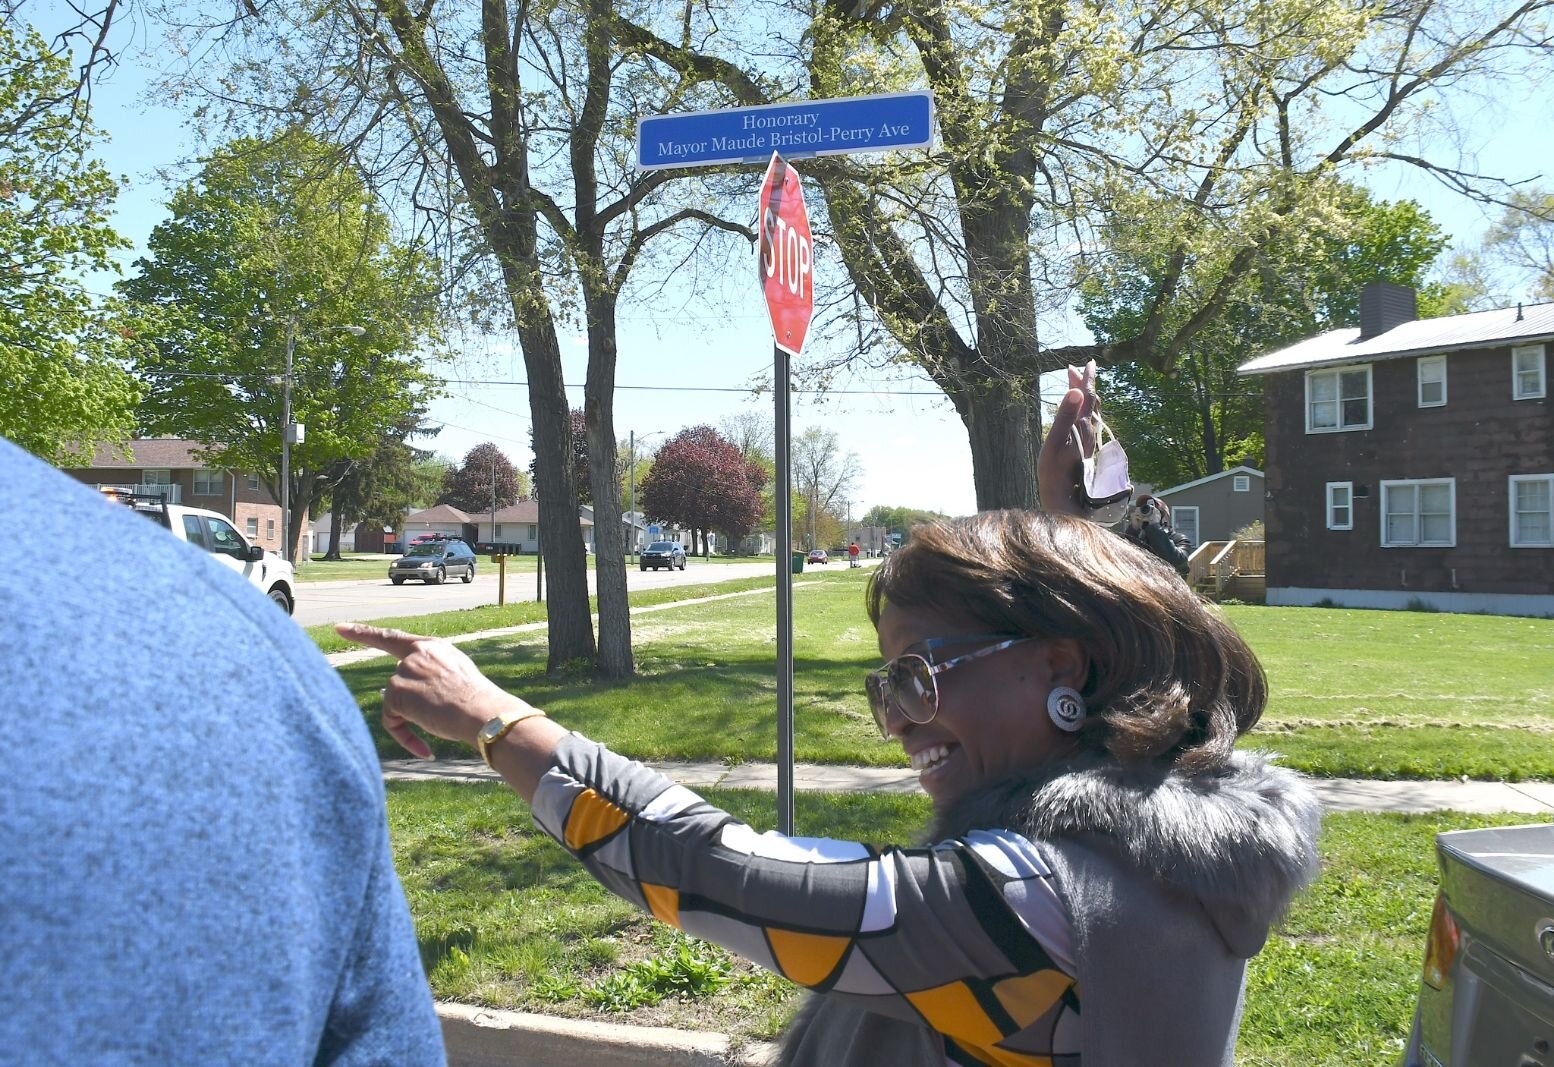 Maude Bristol-Perry reacts to the street sign of Honorary Mayor Maude Bristol-Perry Avenue.